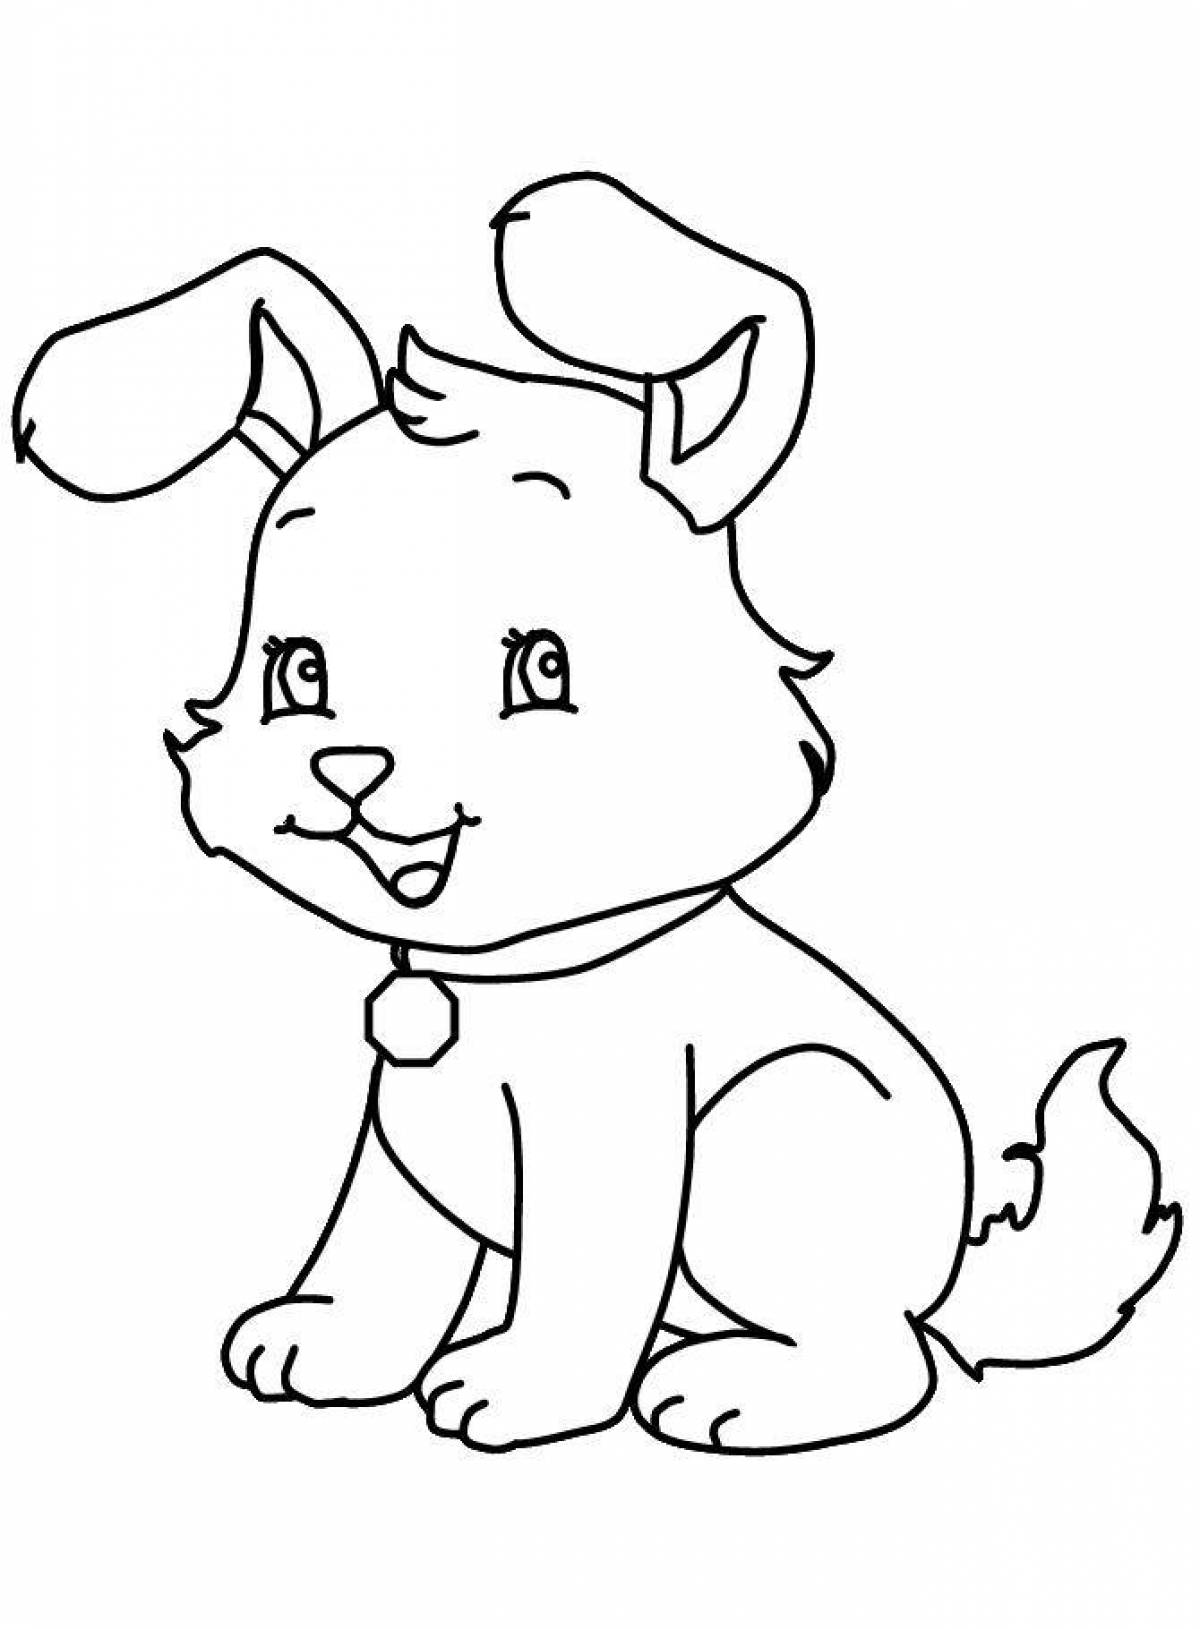 Naughty coloring pages animals cats and dogs